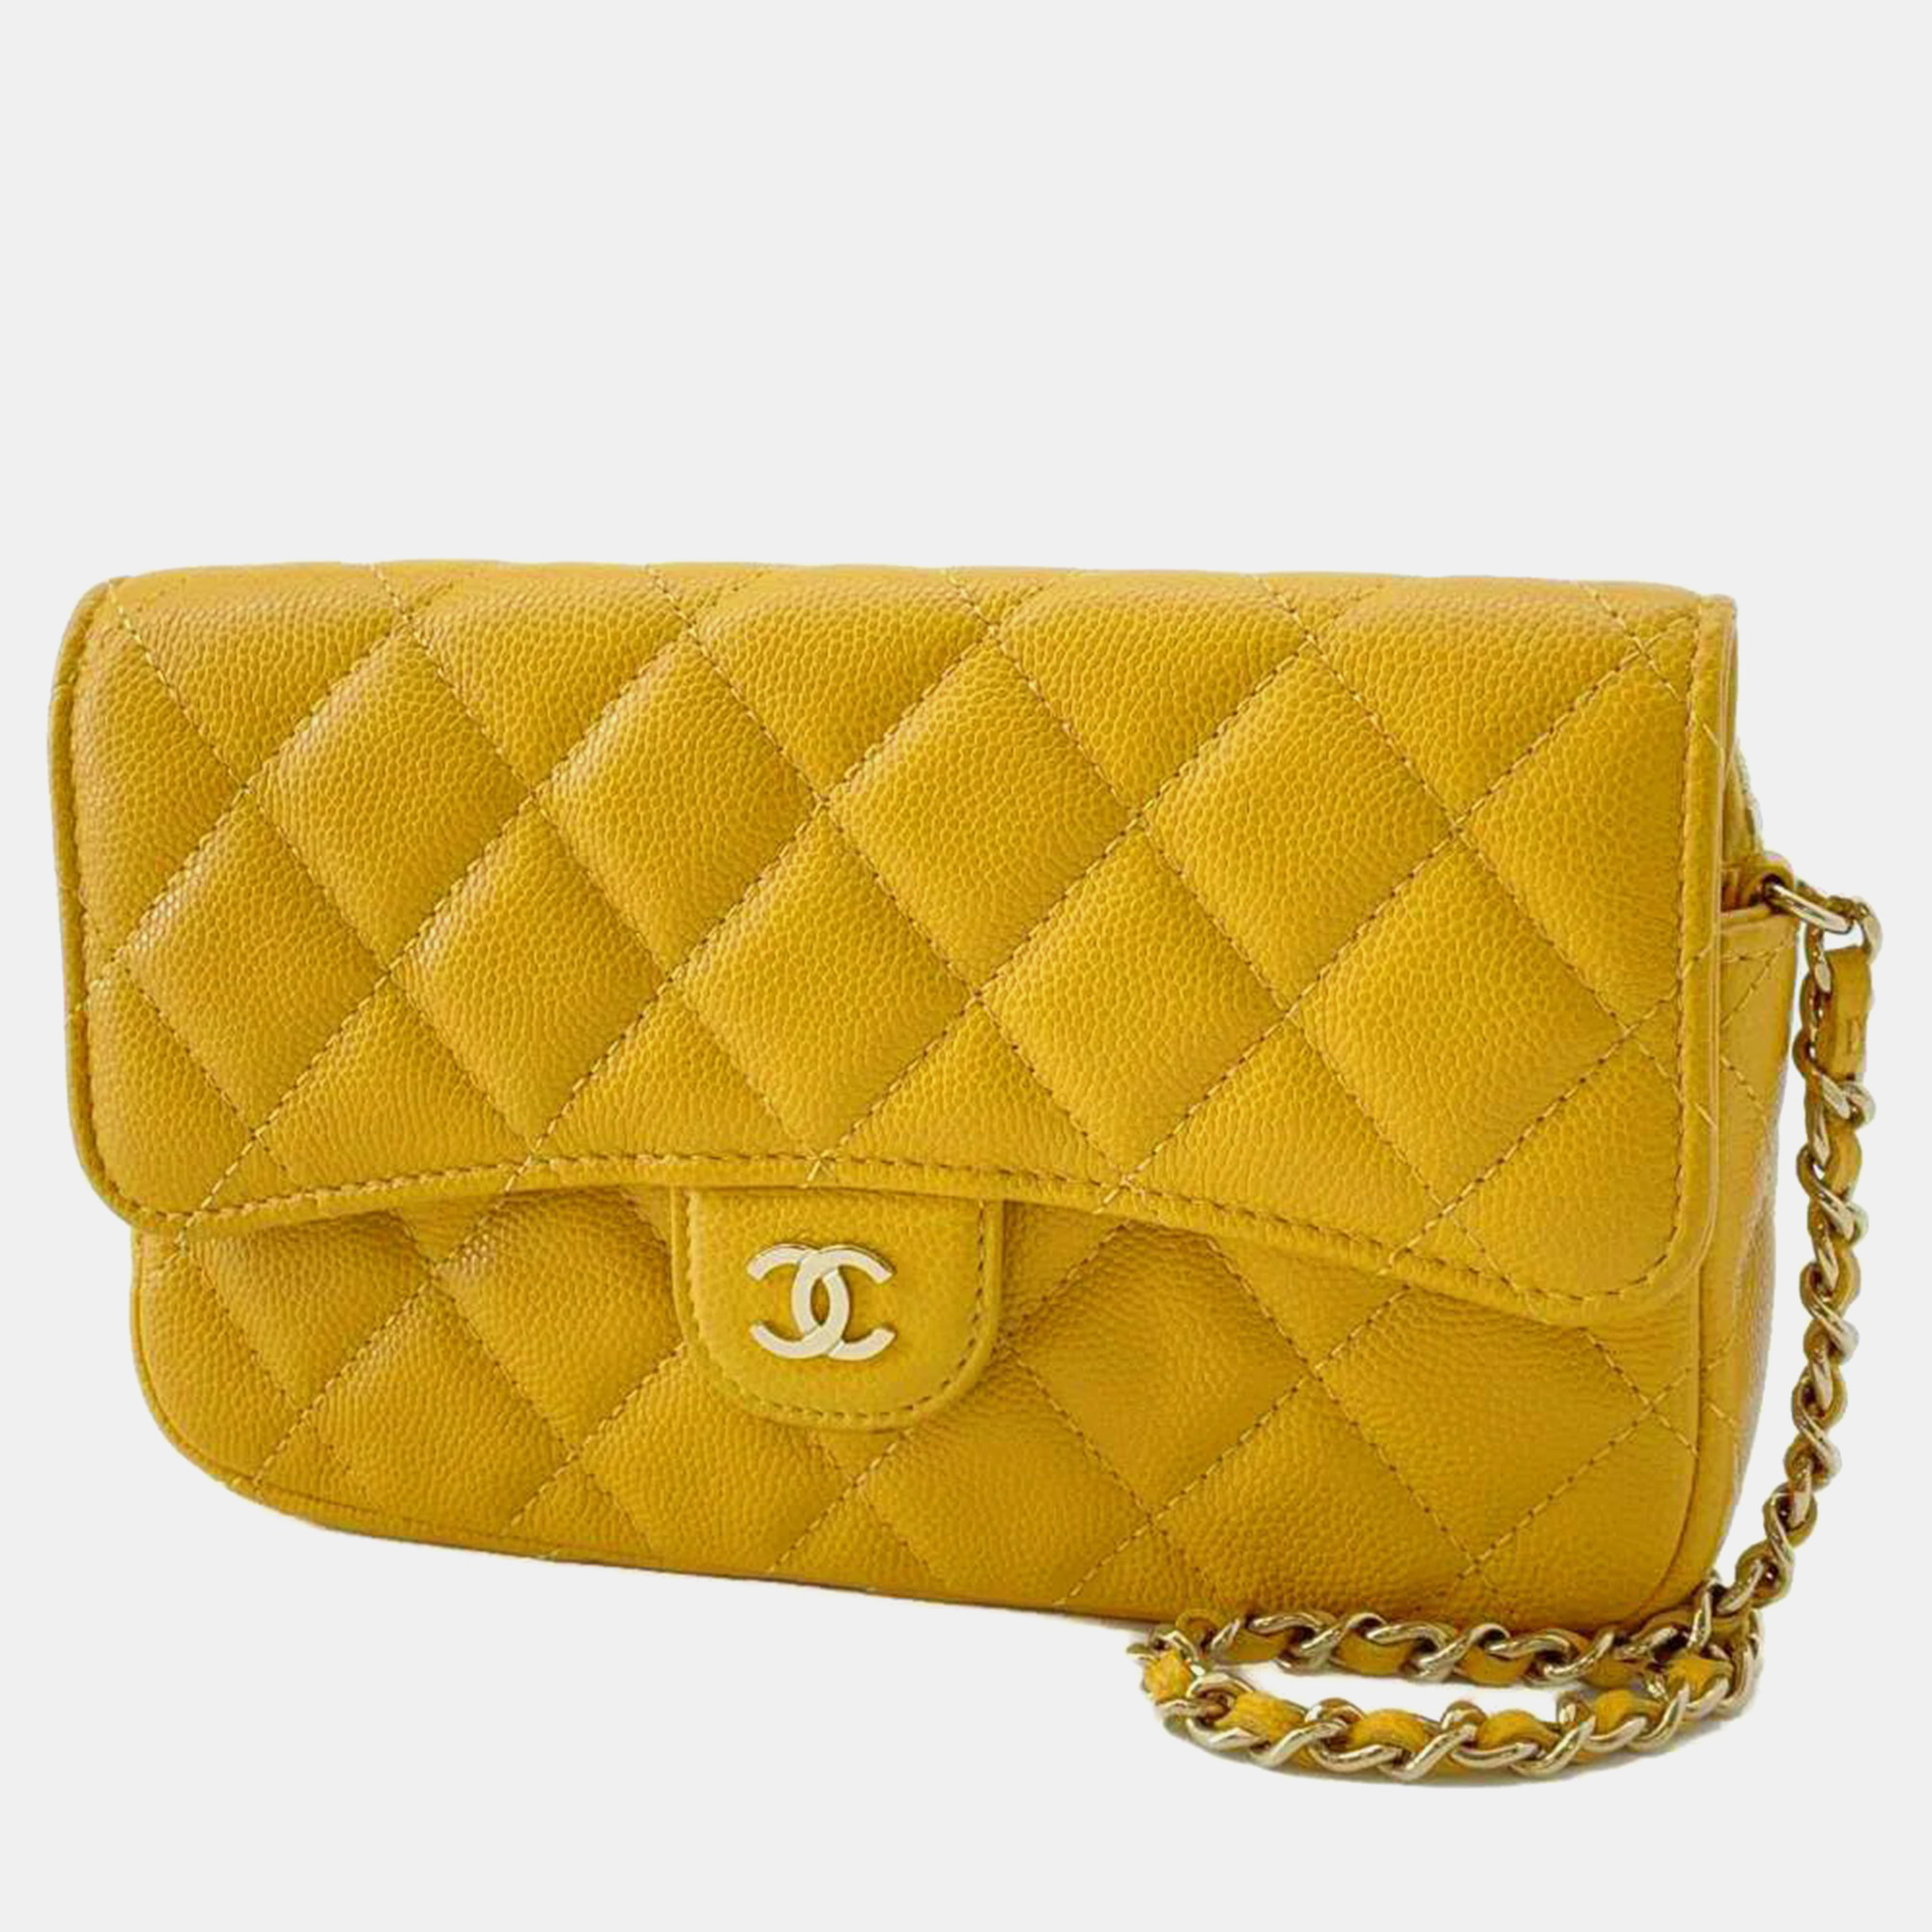 Pre-owned Chanel Yellow Soft Caviar Leather Flap Phone Case Chain Shoulder Bag